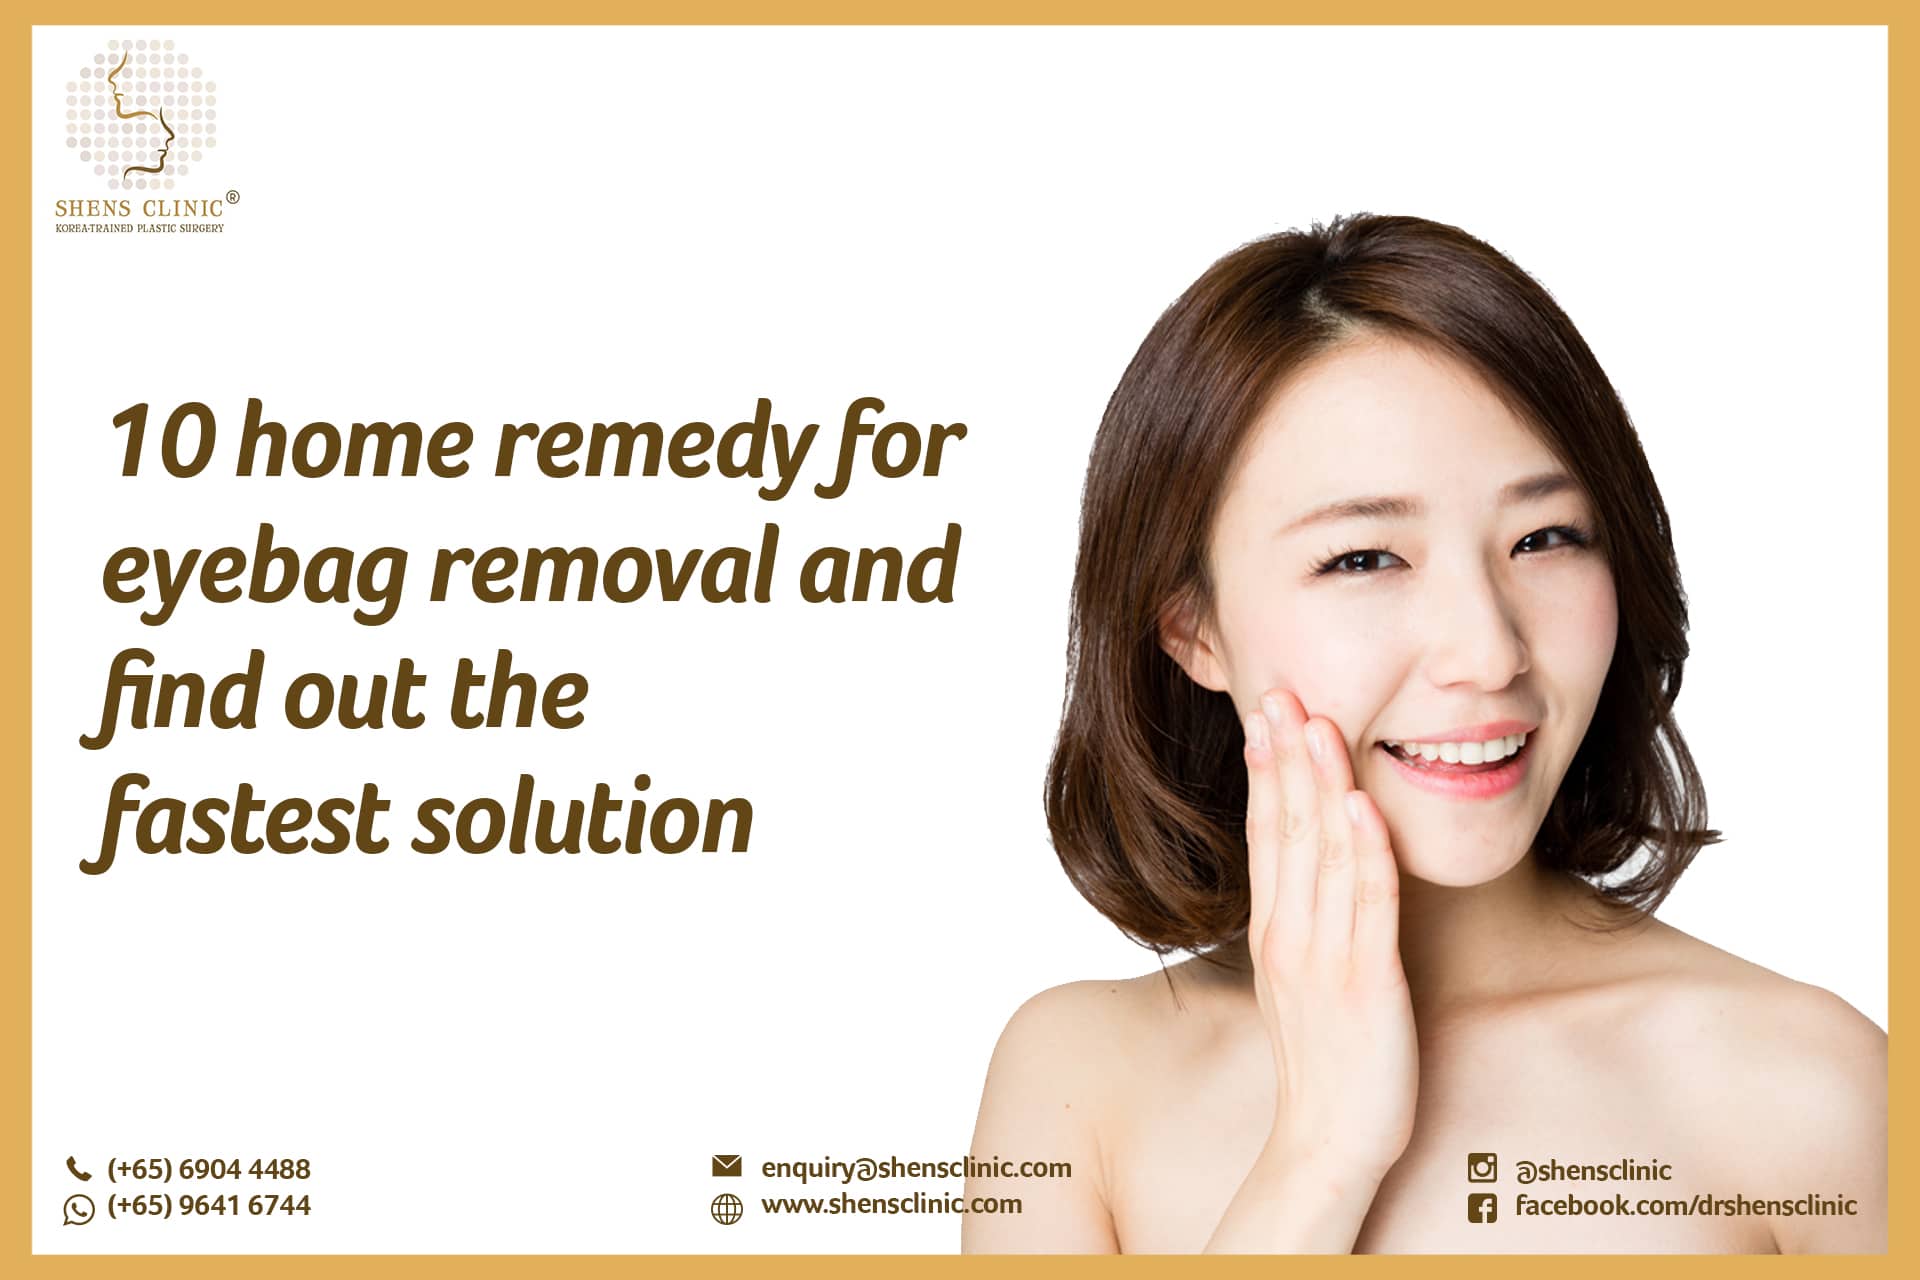 10 Home Remedy for Eyebag Removal and find out the fastest solution